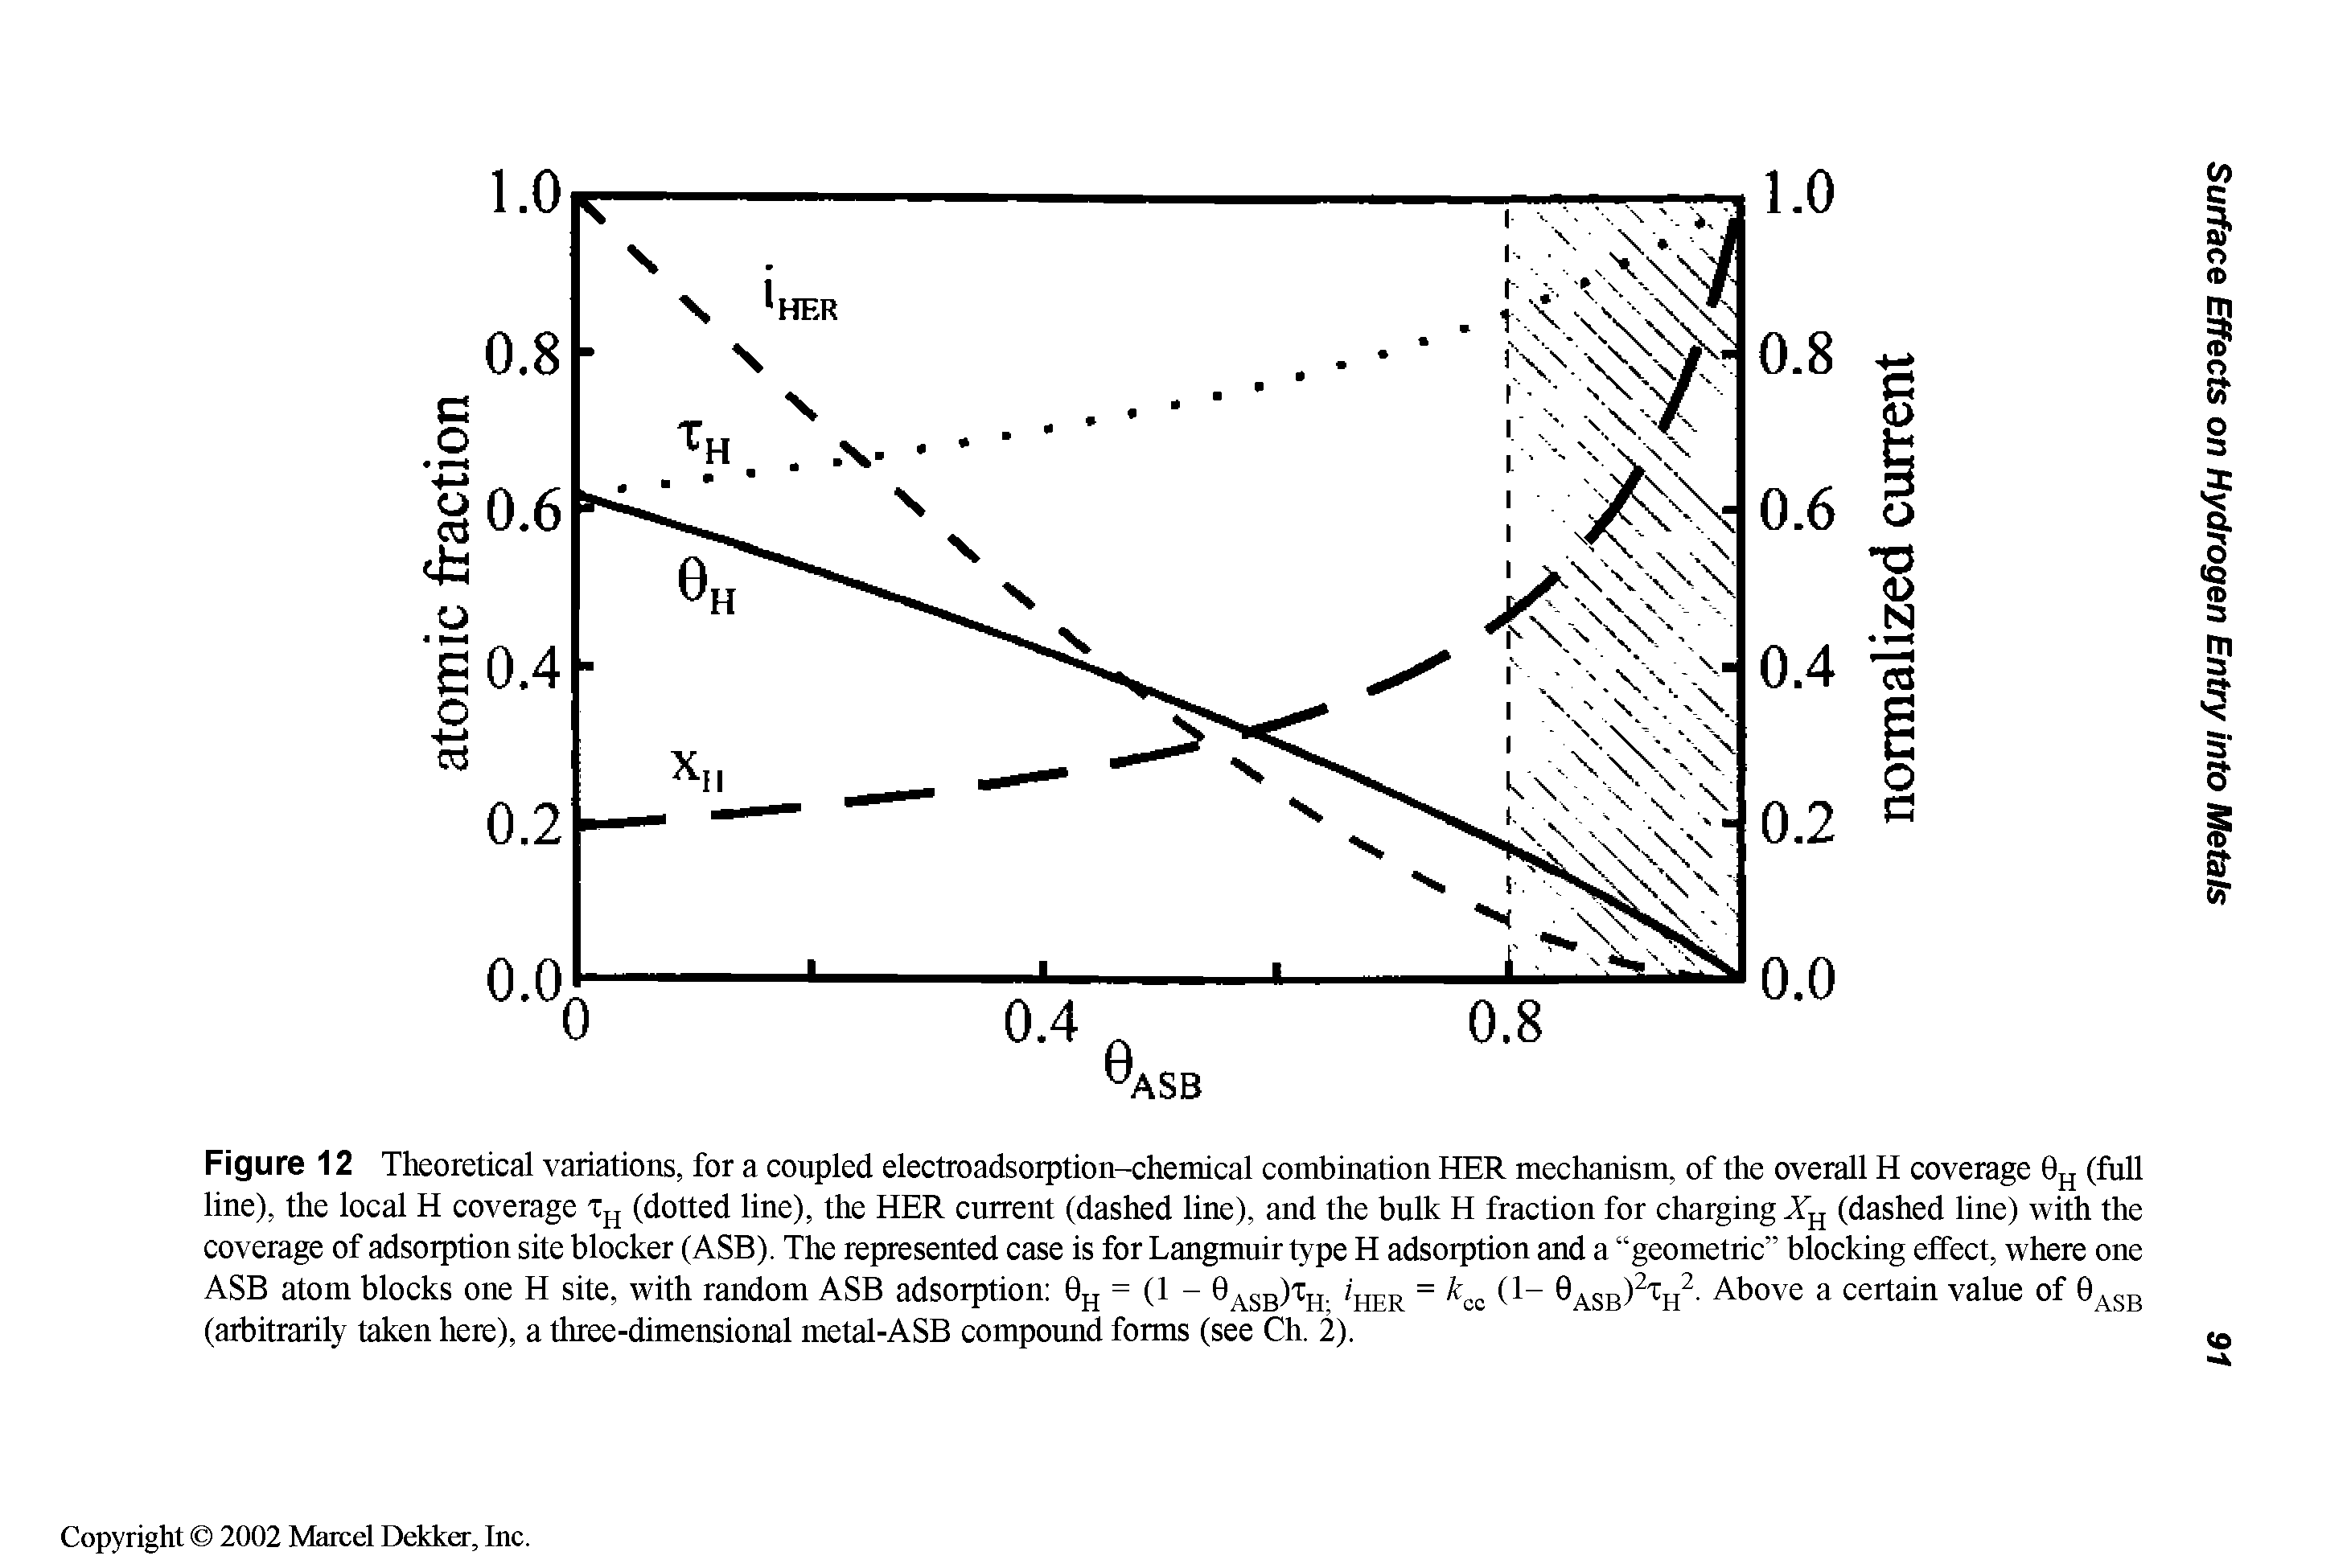 Figure 12 Theoretical variations, for a coupled electroadsorption-chemical combination HER mechanism, of the overall H coverage 0jj (fiill line), the local H coverage Xjj (dotted line), the HER current (dashed line), and the bulk H fraction for charging (dashed line) with the coverage of adsorption site blocker (ASB). The represented case is for Langmuir type H adsorption and a geometric blocking effect, where one ASB atom blocks one H site, with random ASB adsorption 6h asb)% her cc asb) h Above a certain value of 0 gg...